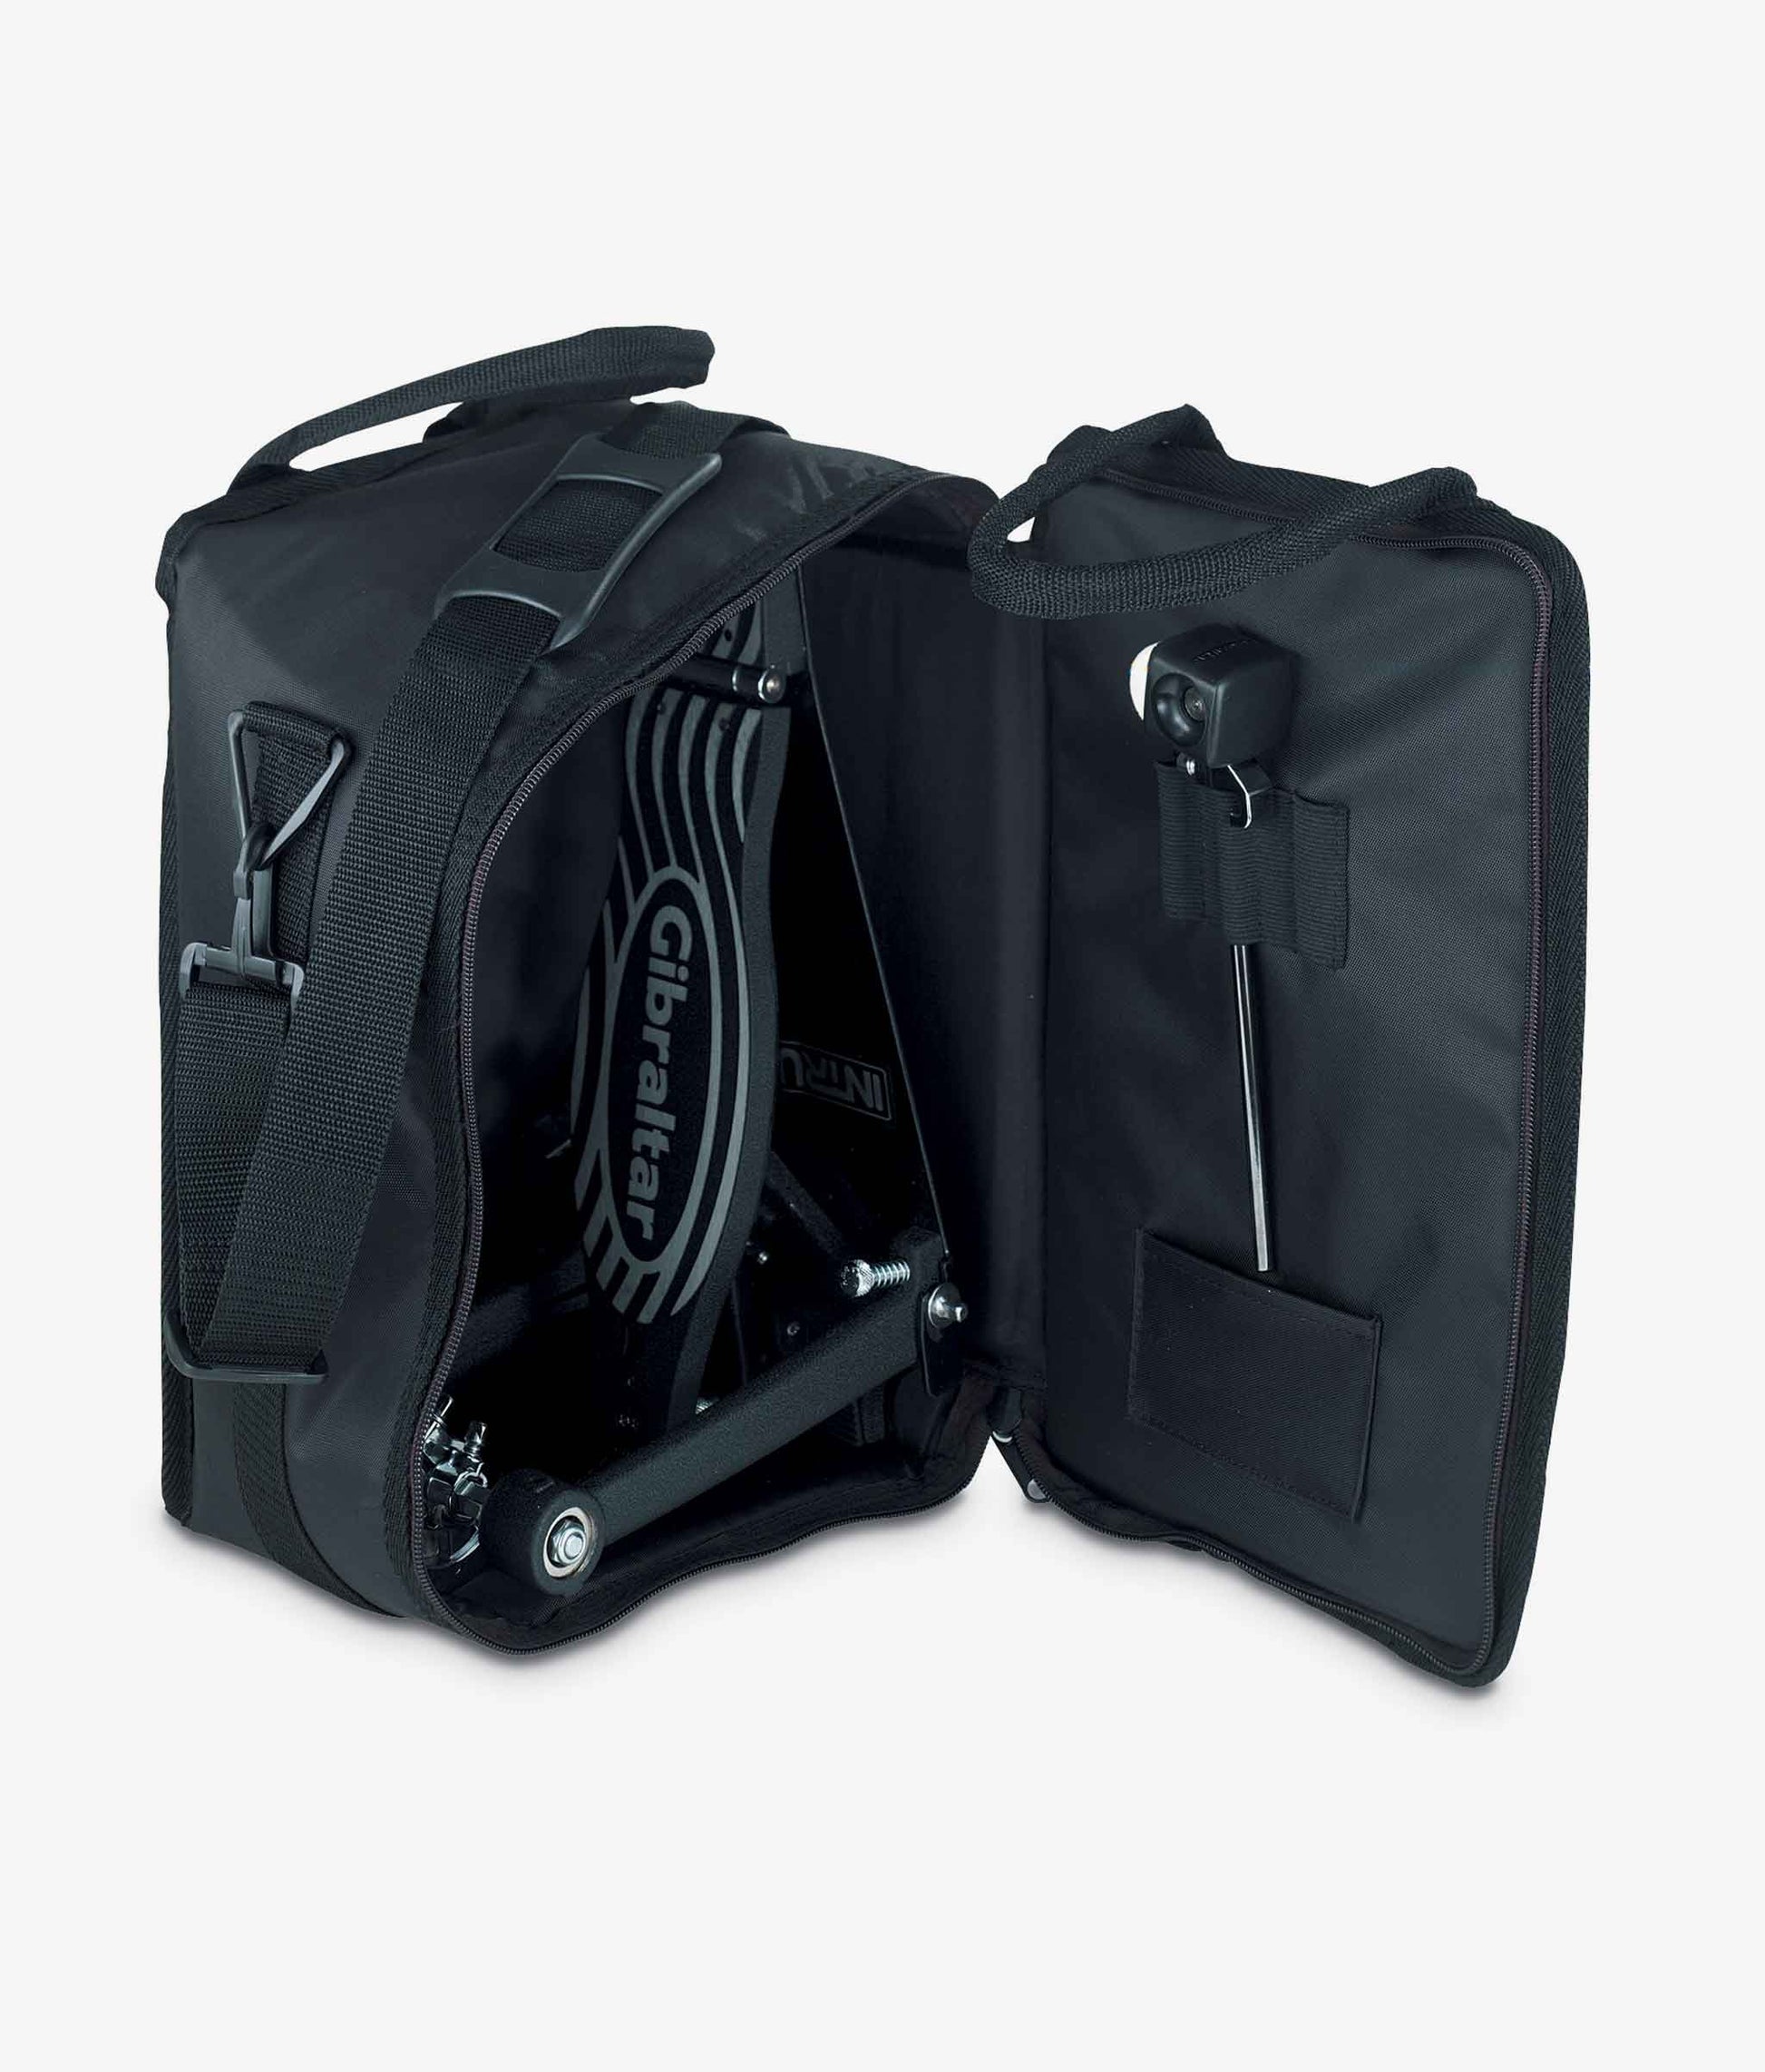 Gibraltar Double Pedal Carrying Bag